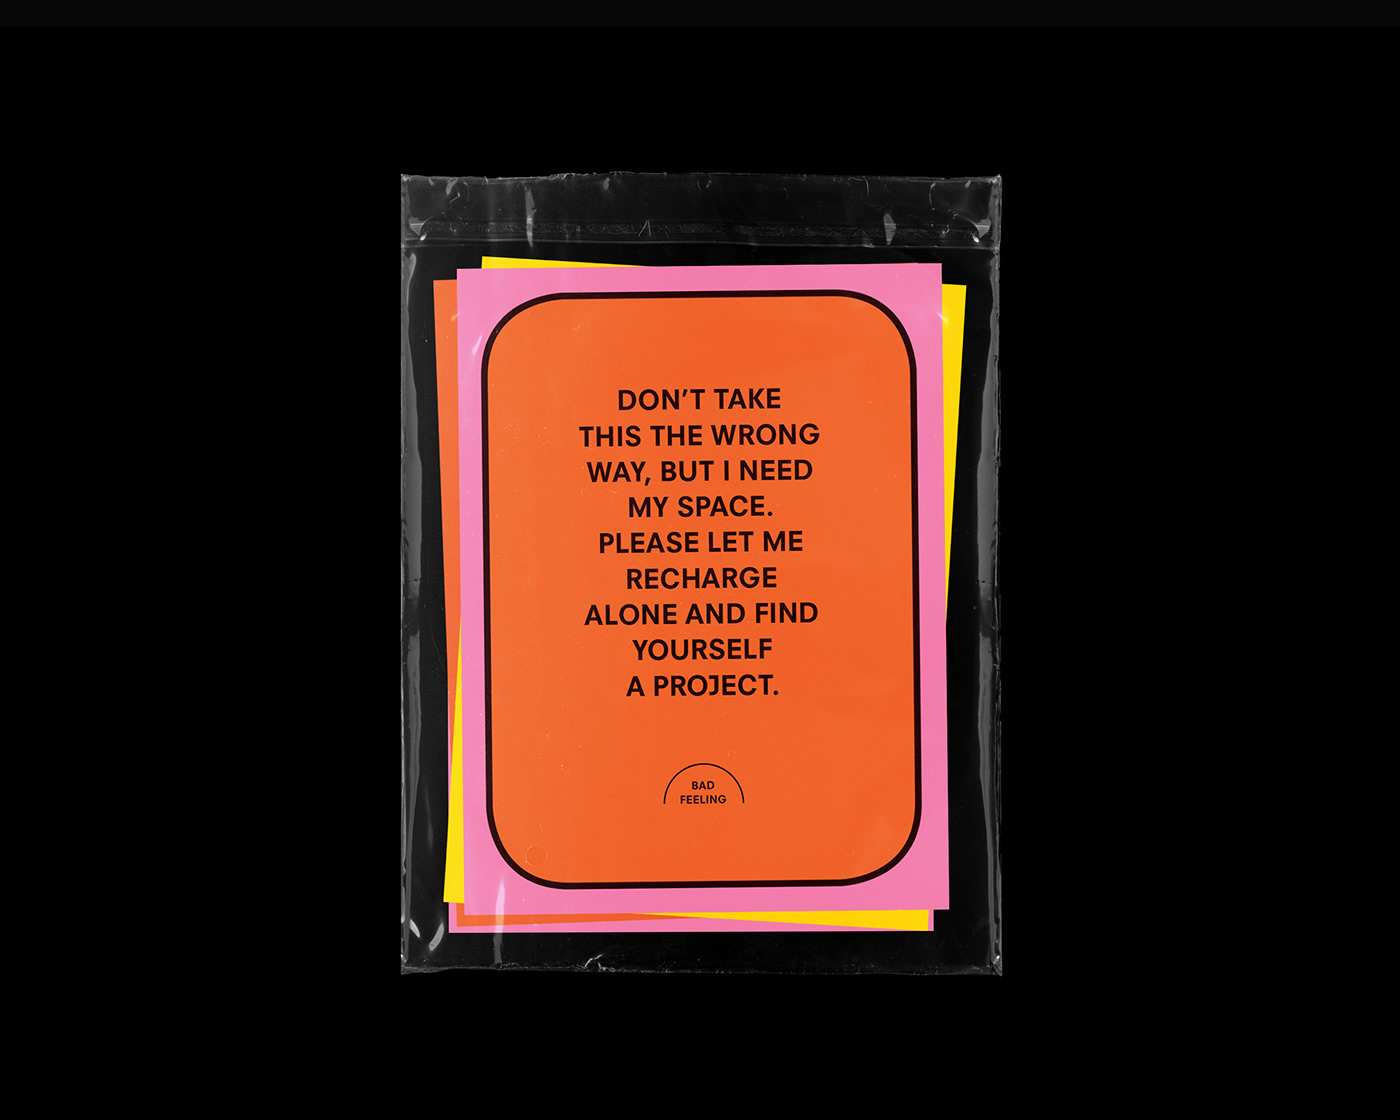 bad feeling introversion introverts avoid people Sadness anxiety book design UQAM PDFE Montreal